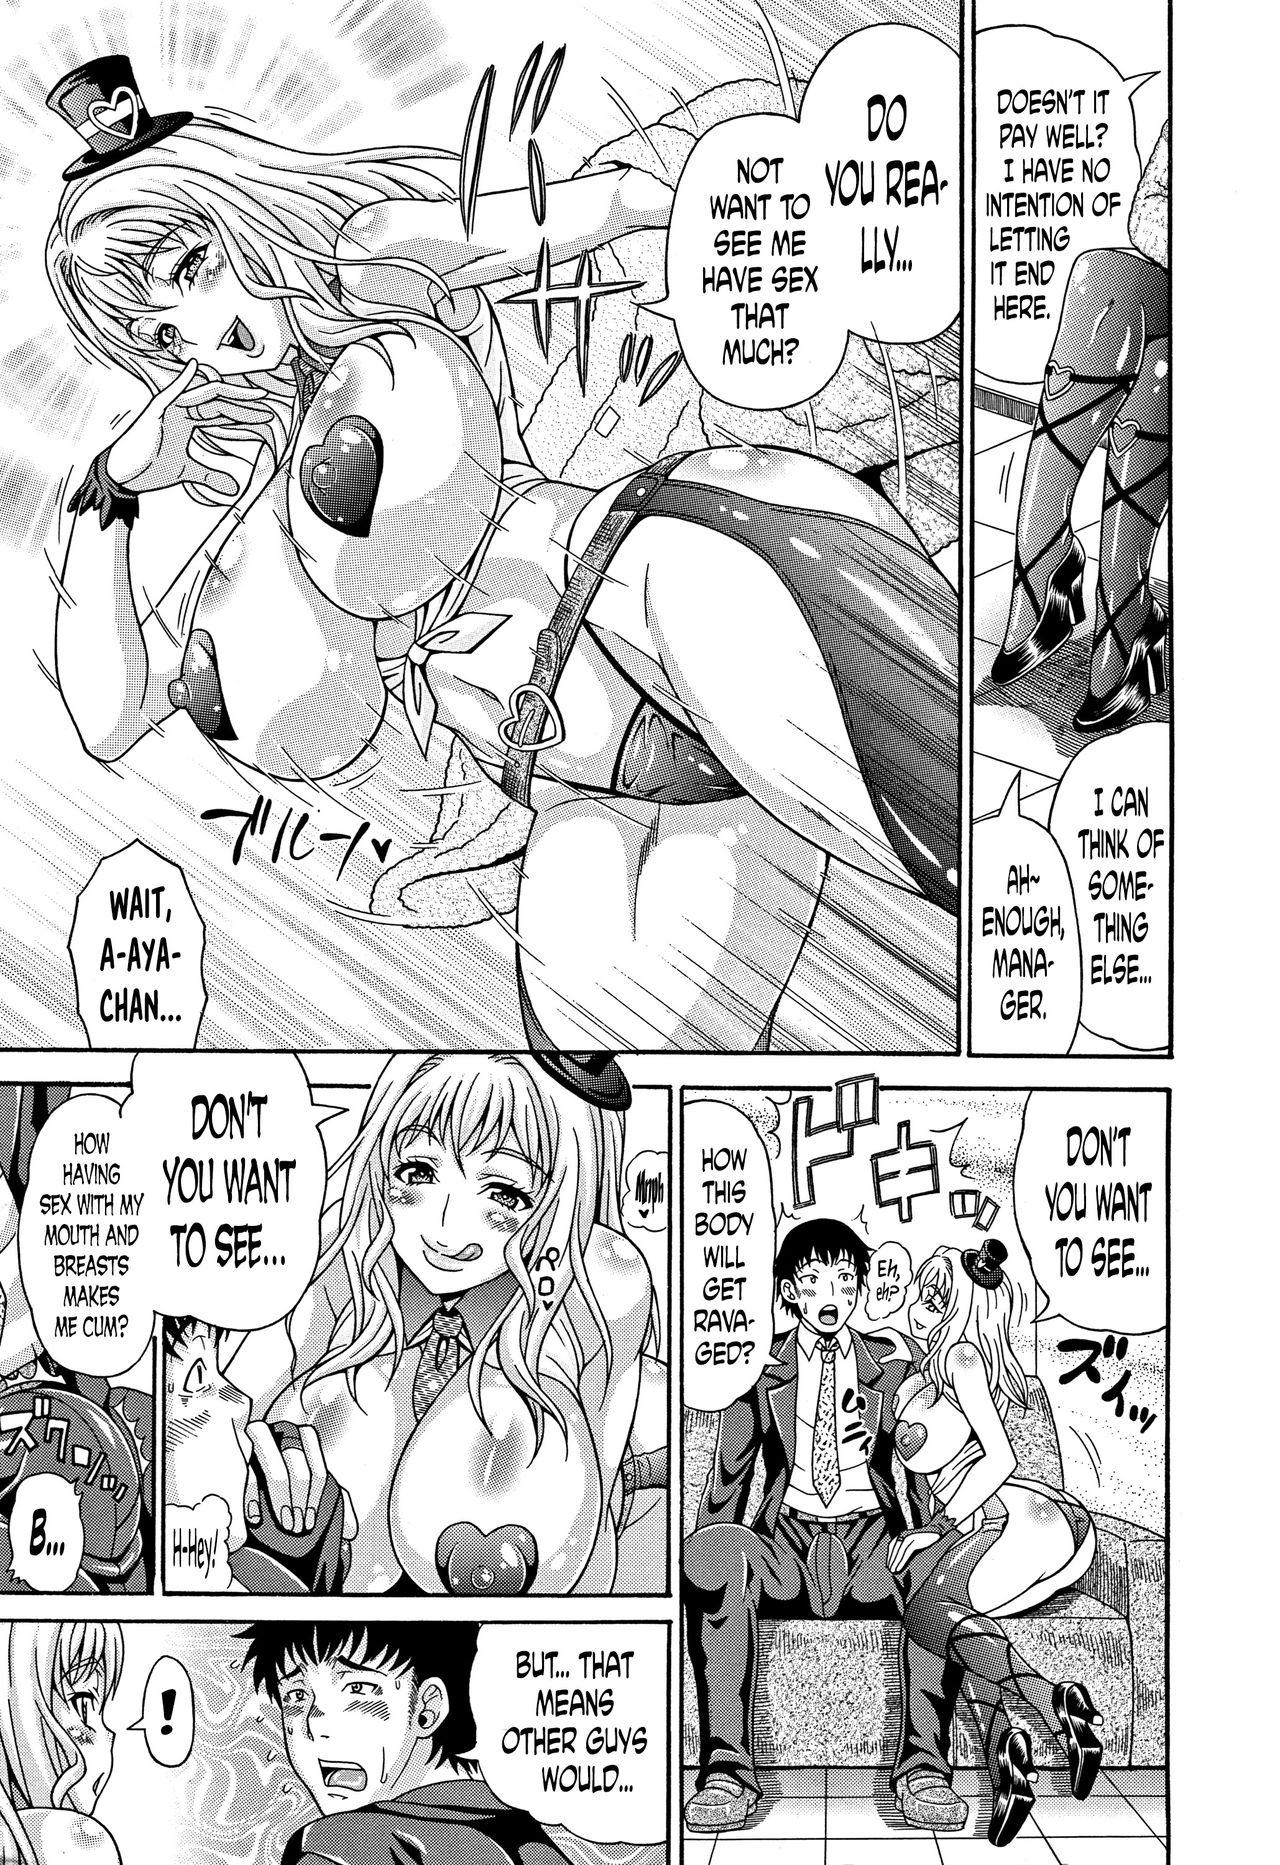 Amigos [Andou Hiroyuki] Mamire Chichi - Sticky Tits Feel Hot All Over. Ch.1-10 [English] [doujin-moe.us] Missionary Porn - Page 8